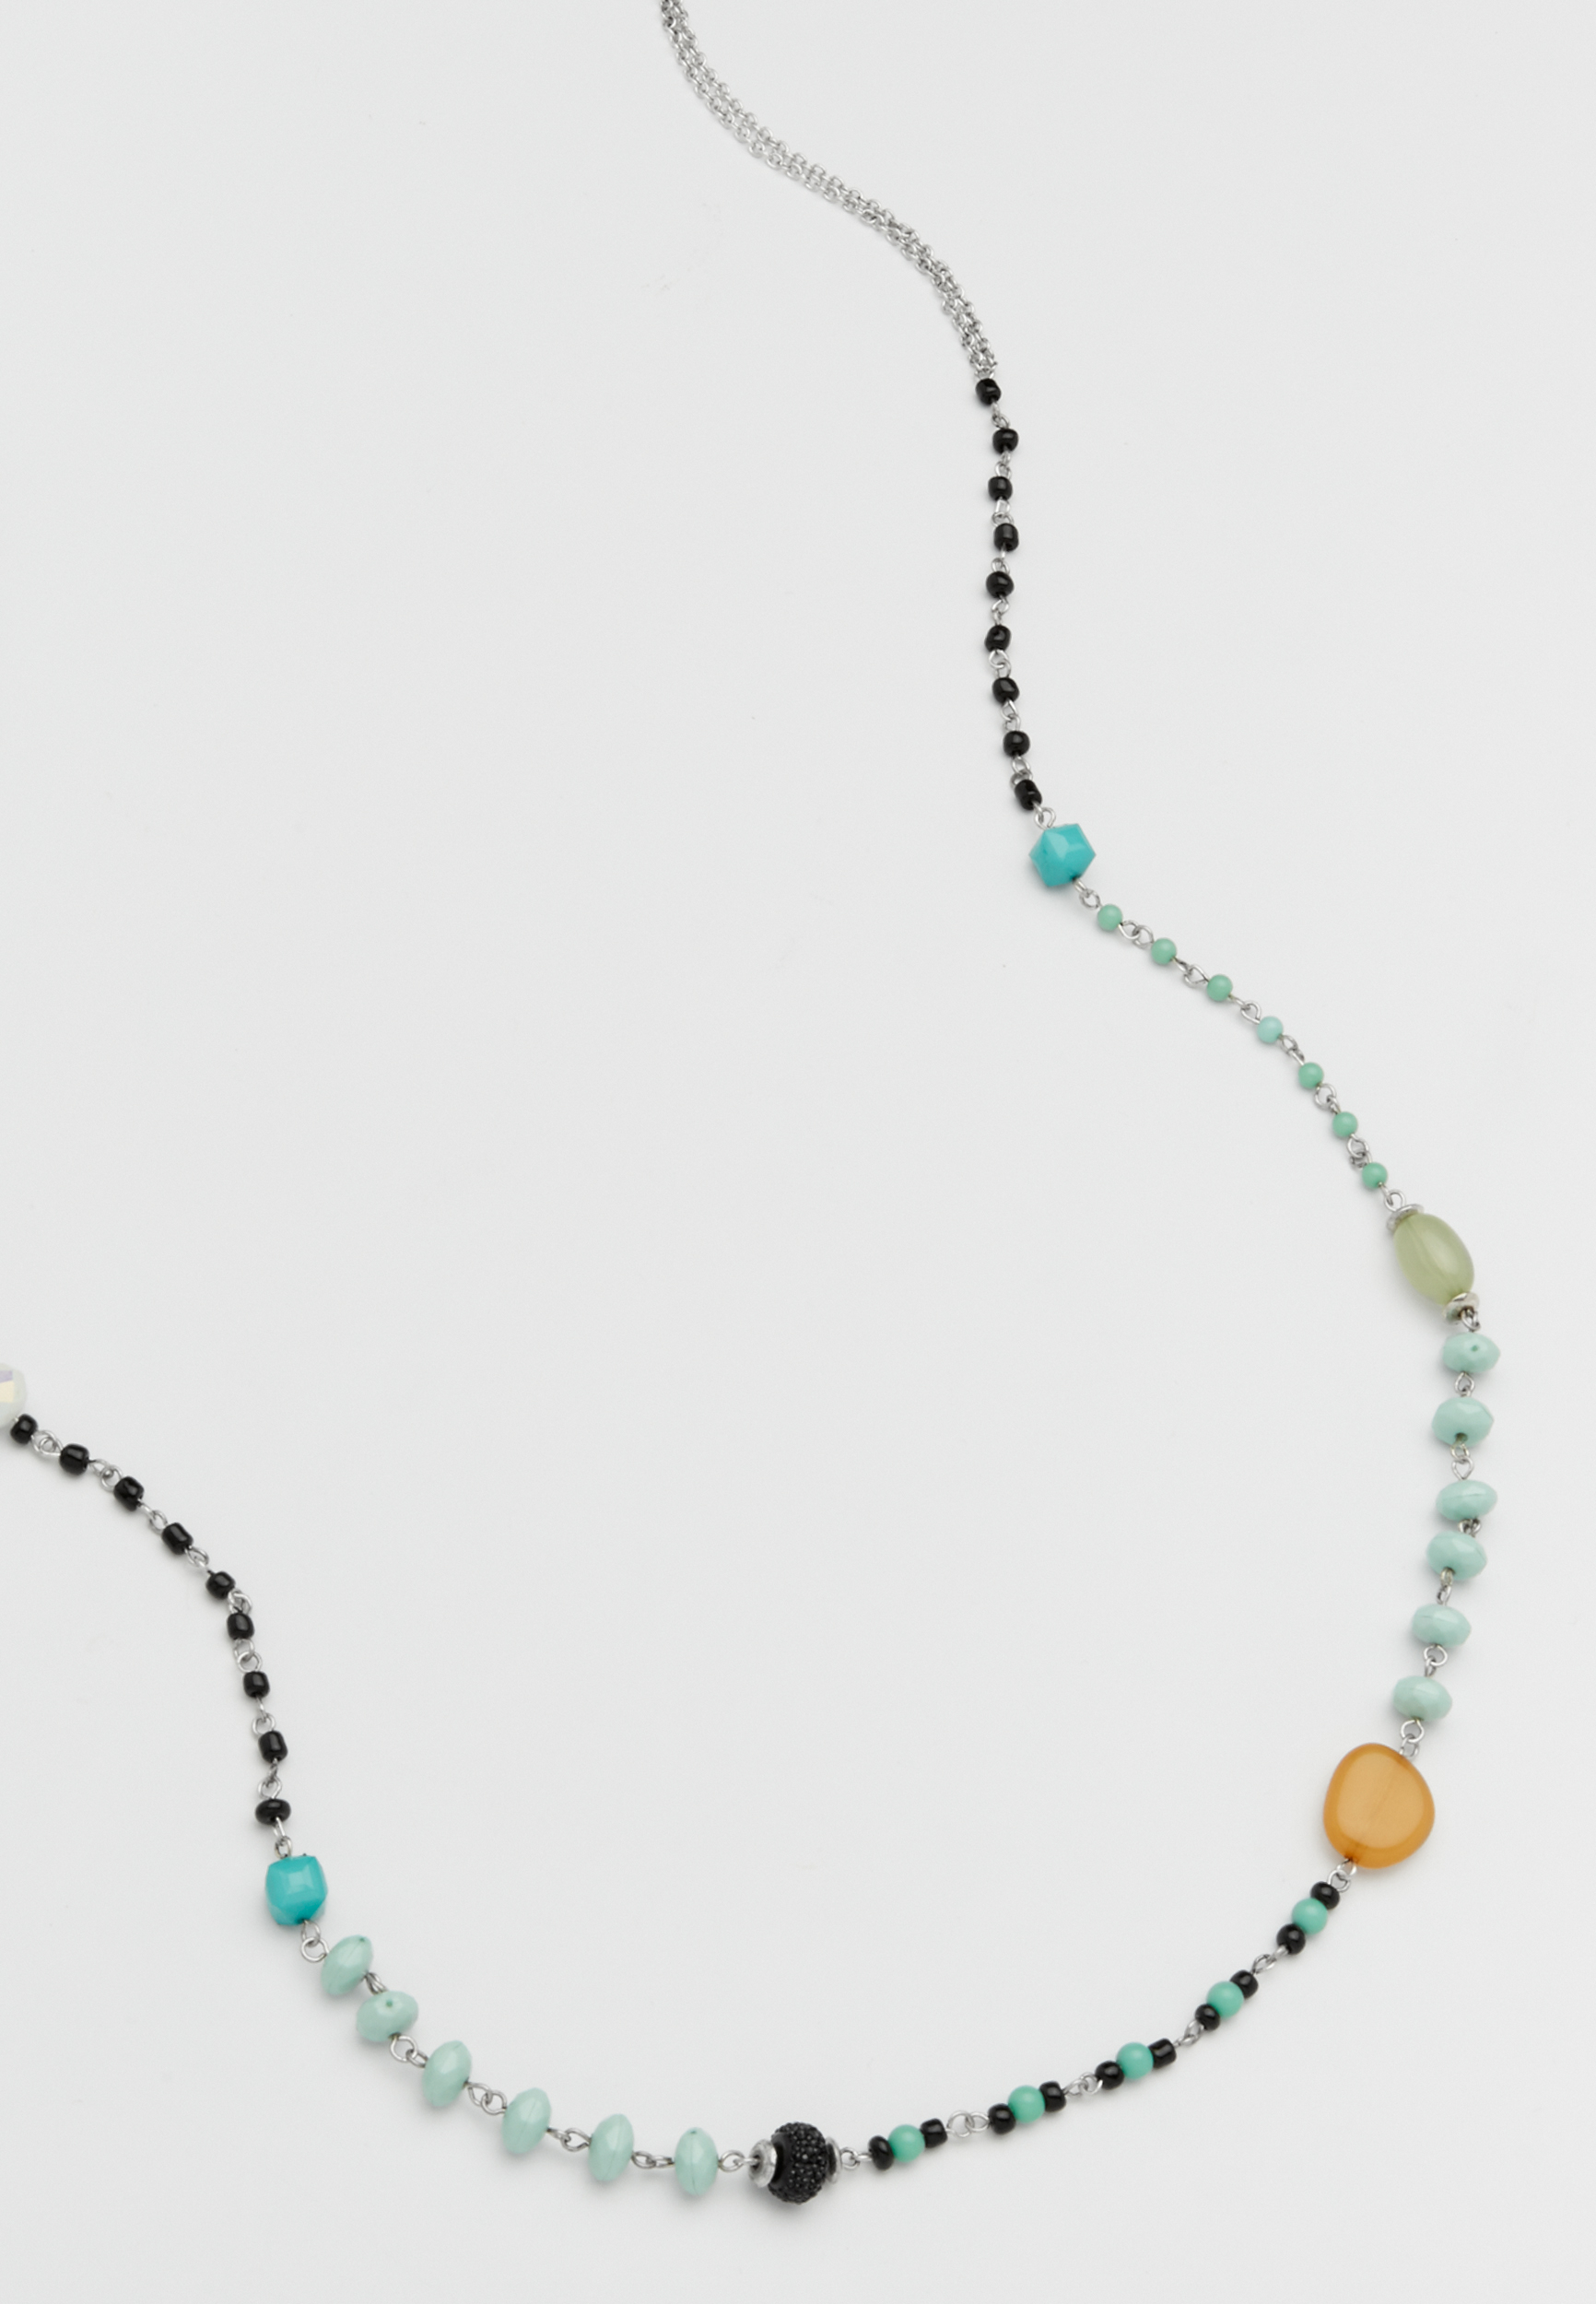 silvertone necklace with black and mint beads | maurices